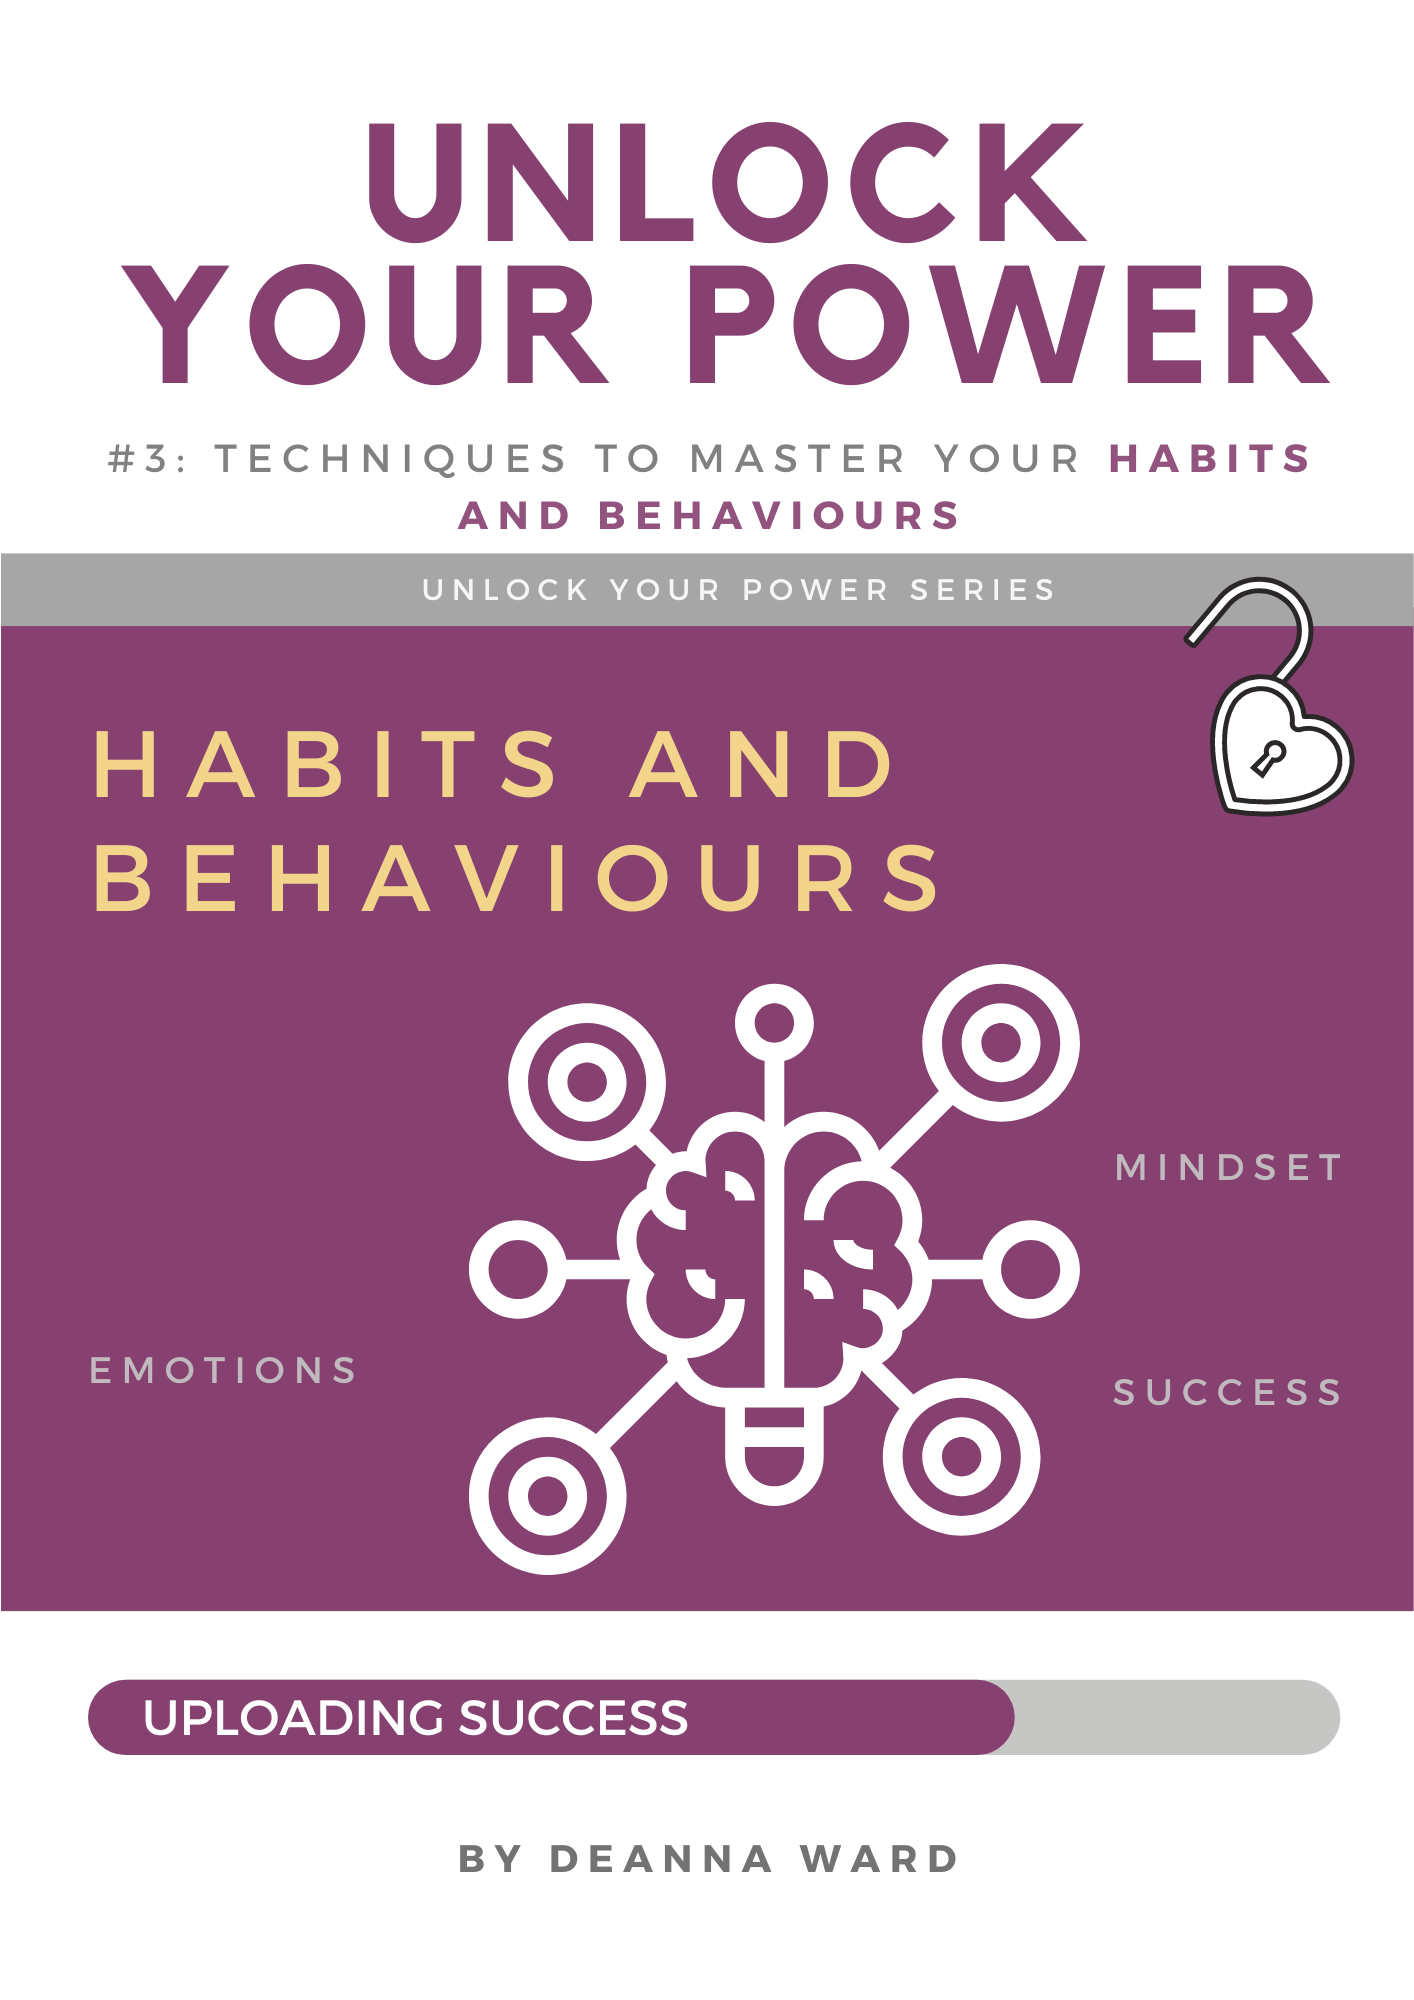 Image of book cover UNLOCK YOUR POWER: #3 Techniques to Master Your Habits and Behaviours by Deanna C Ward.